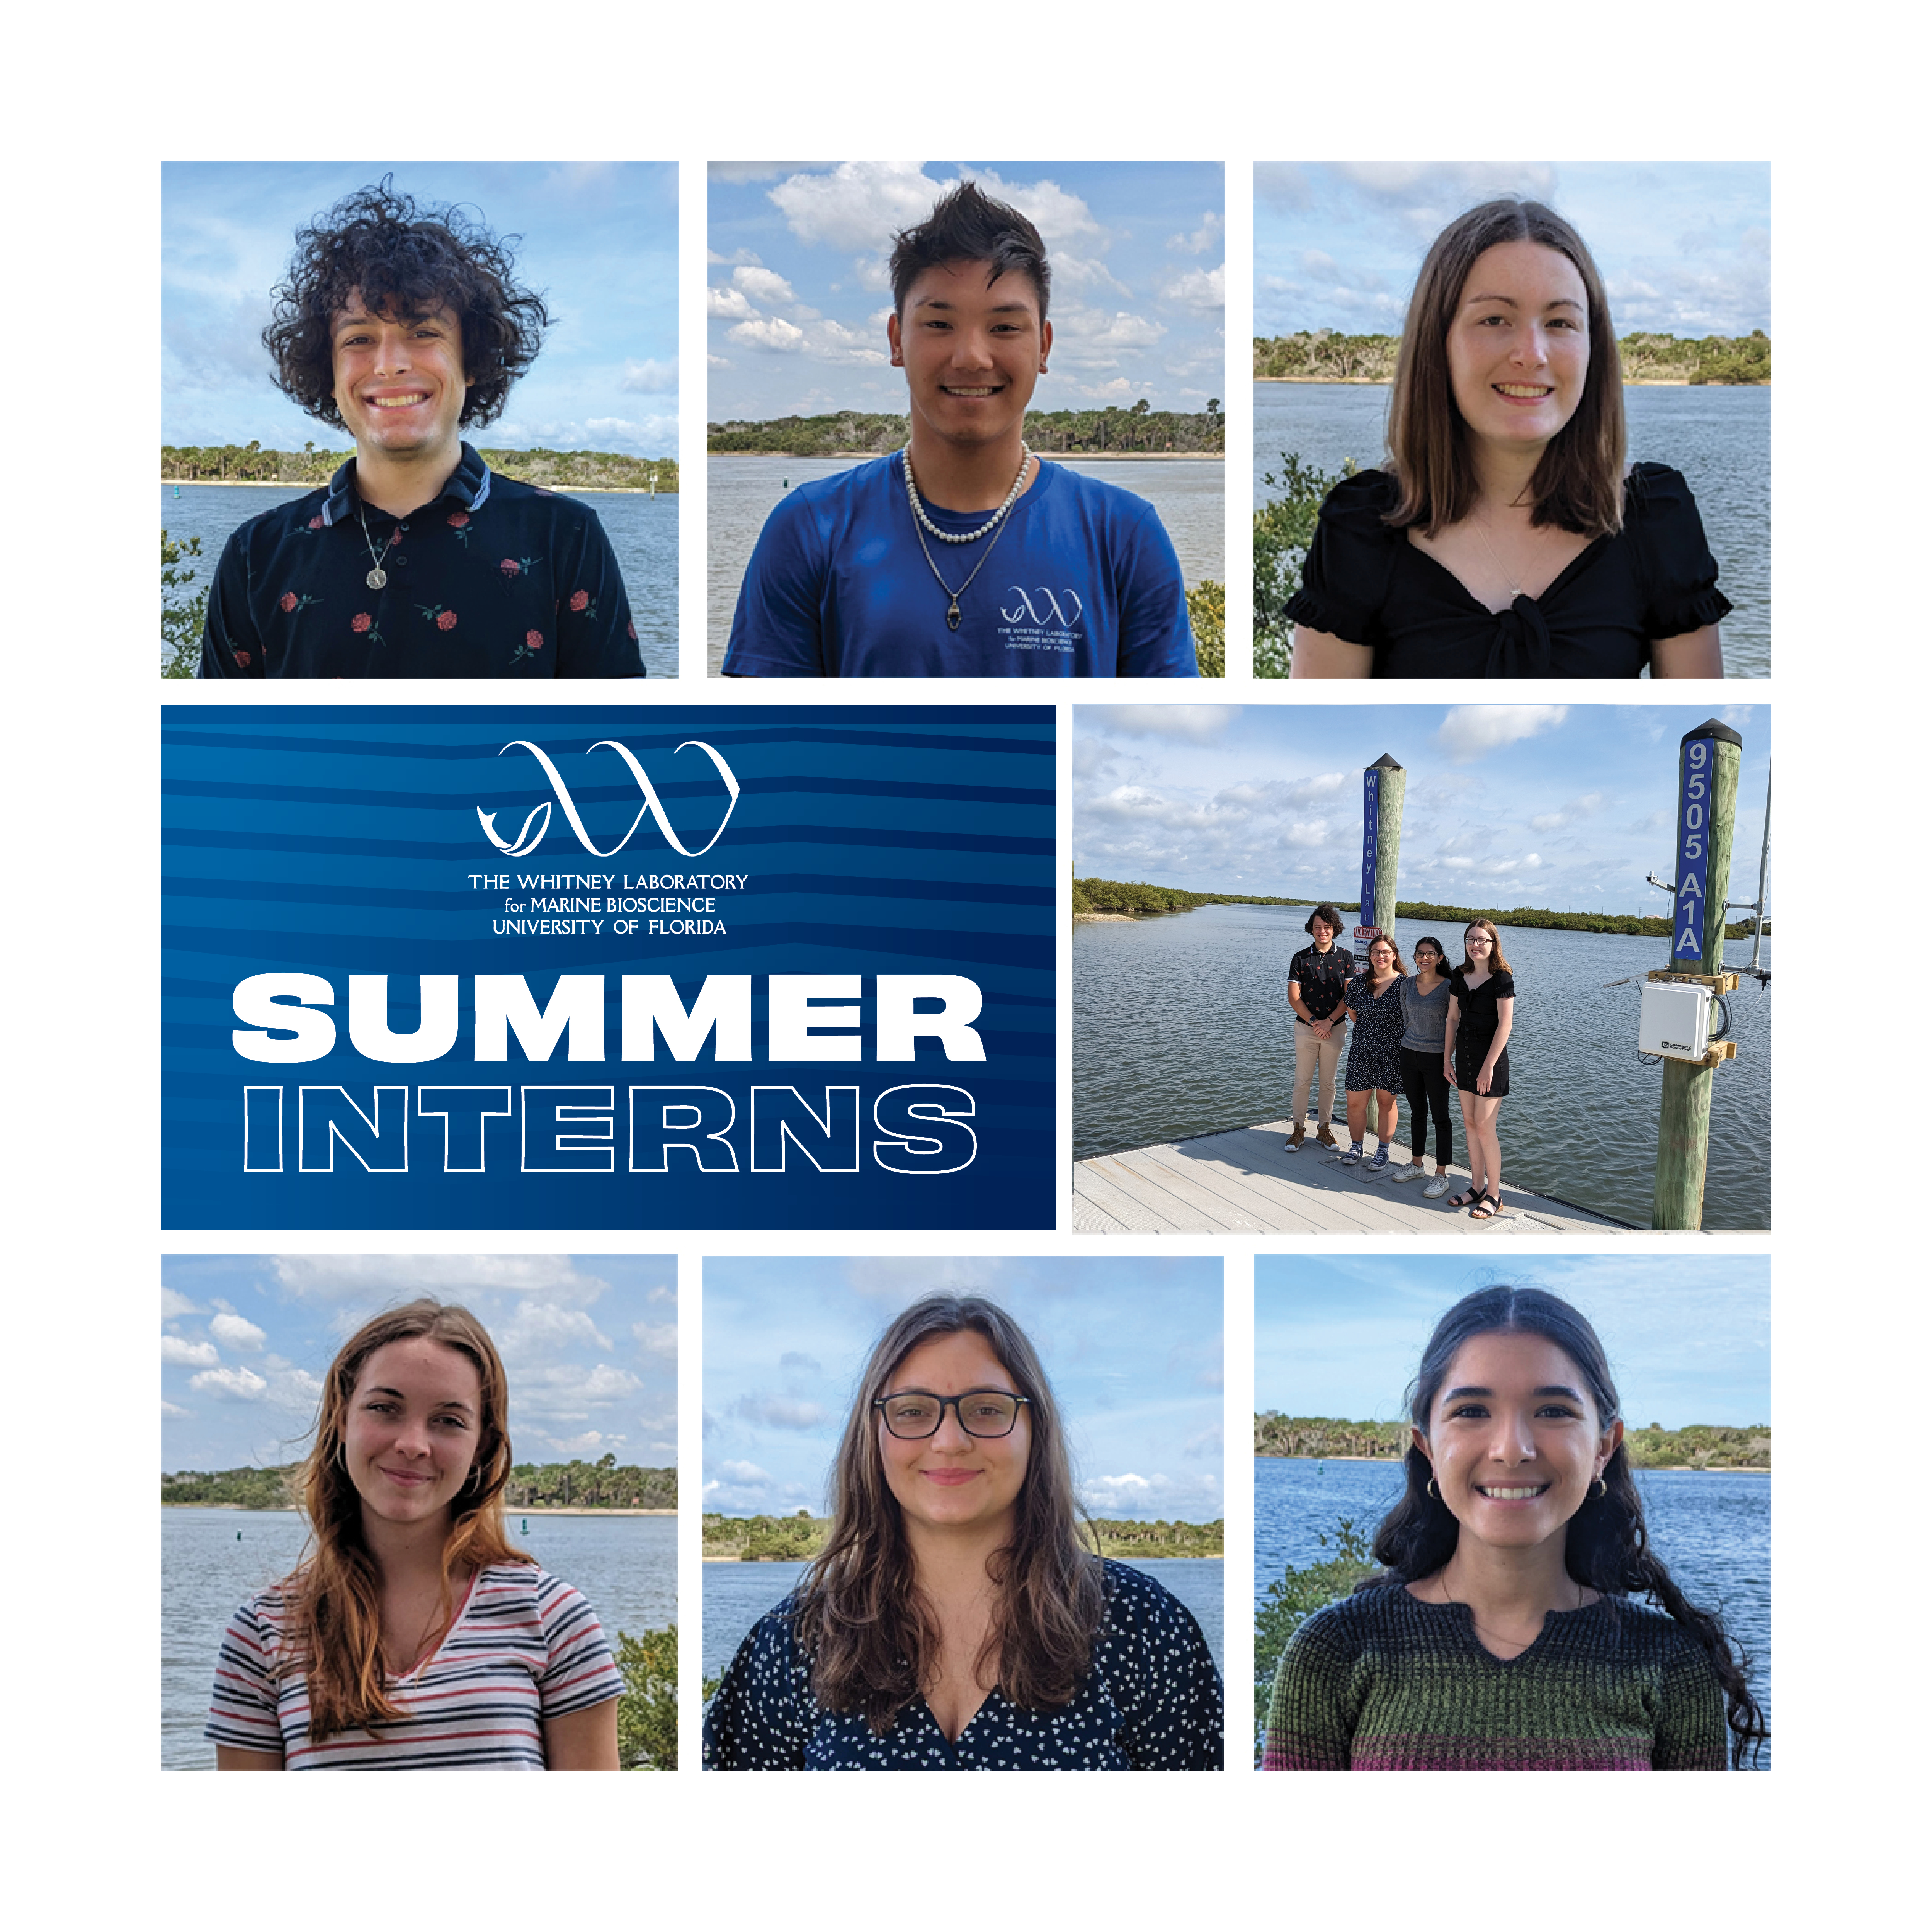 Photos of six students, group of students standing on a dock